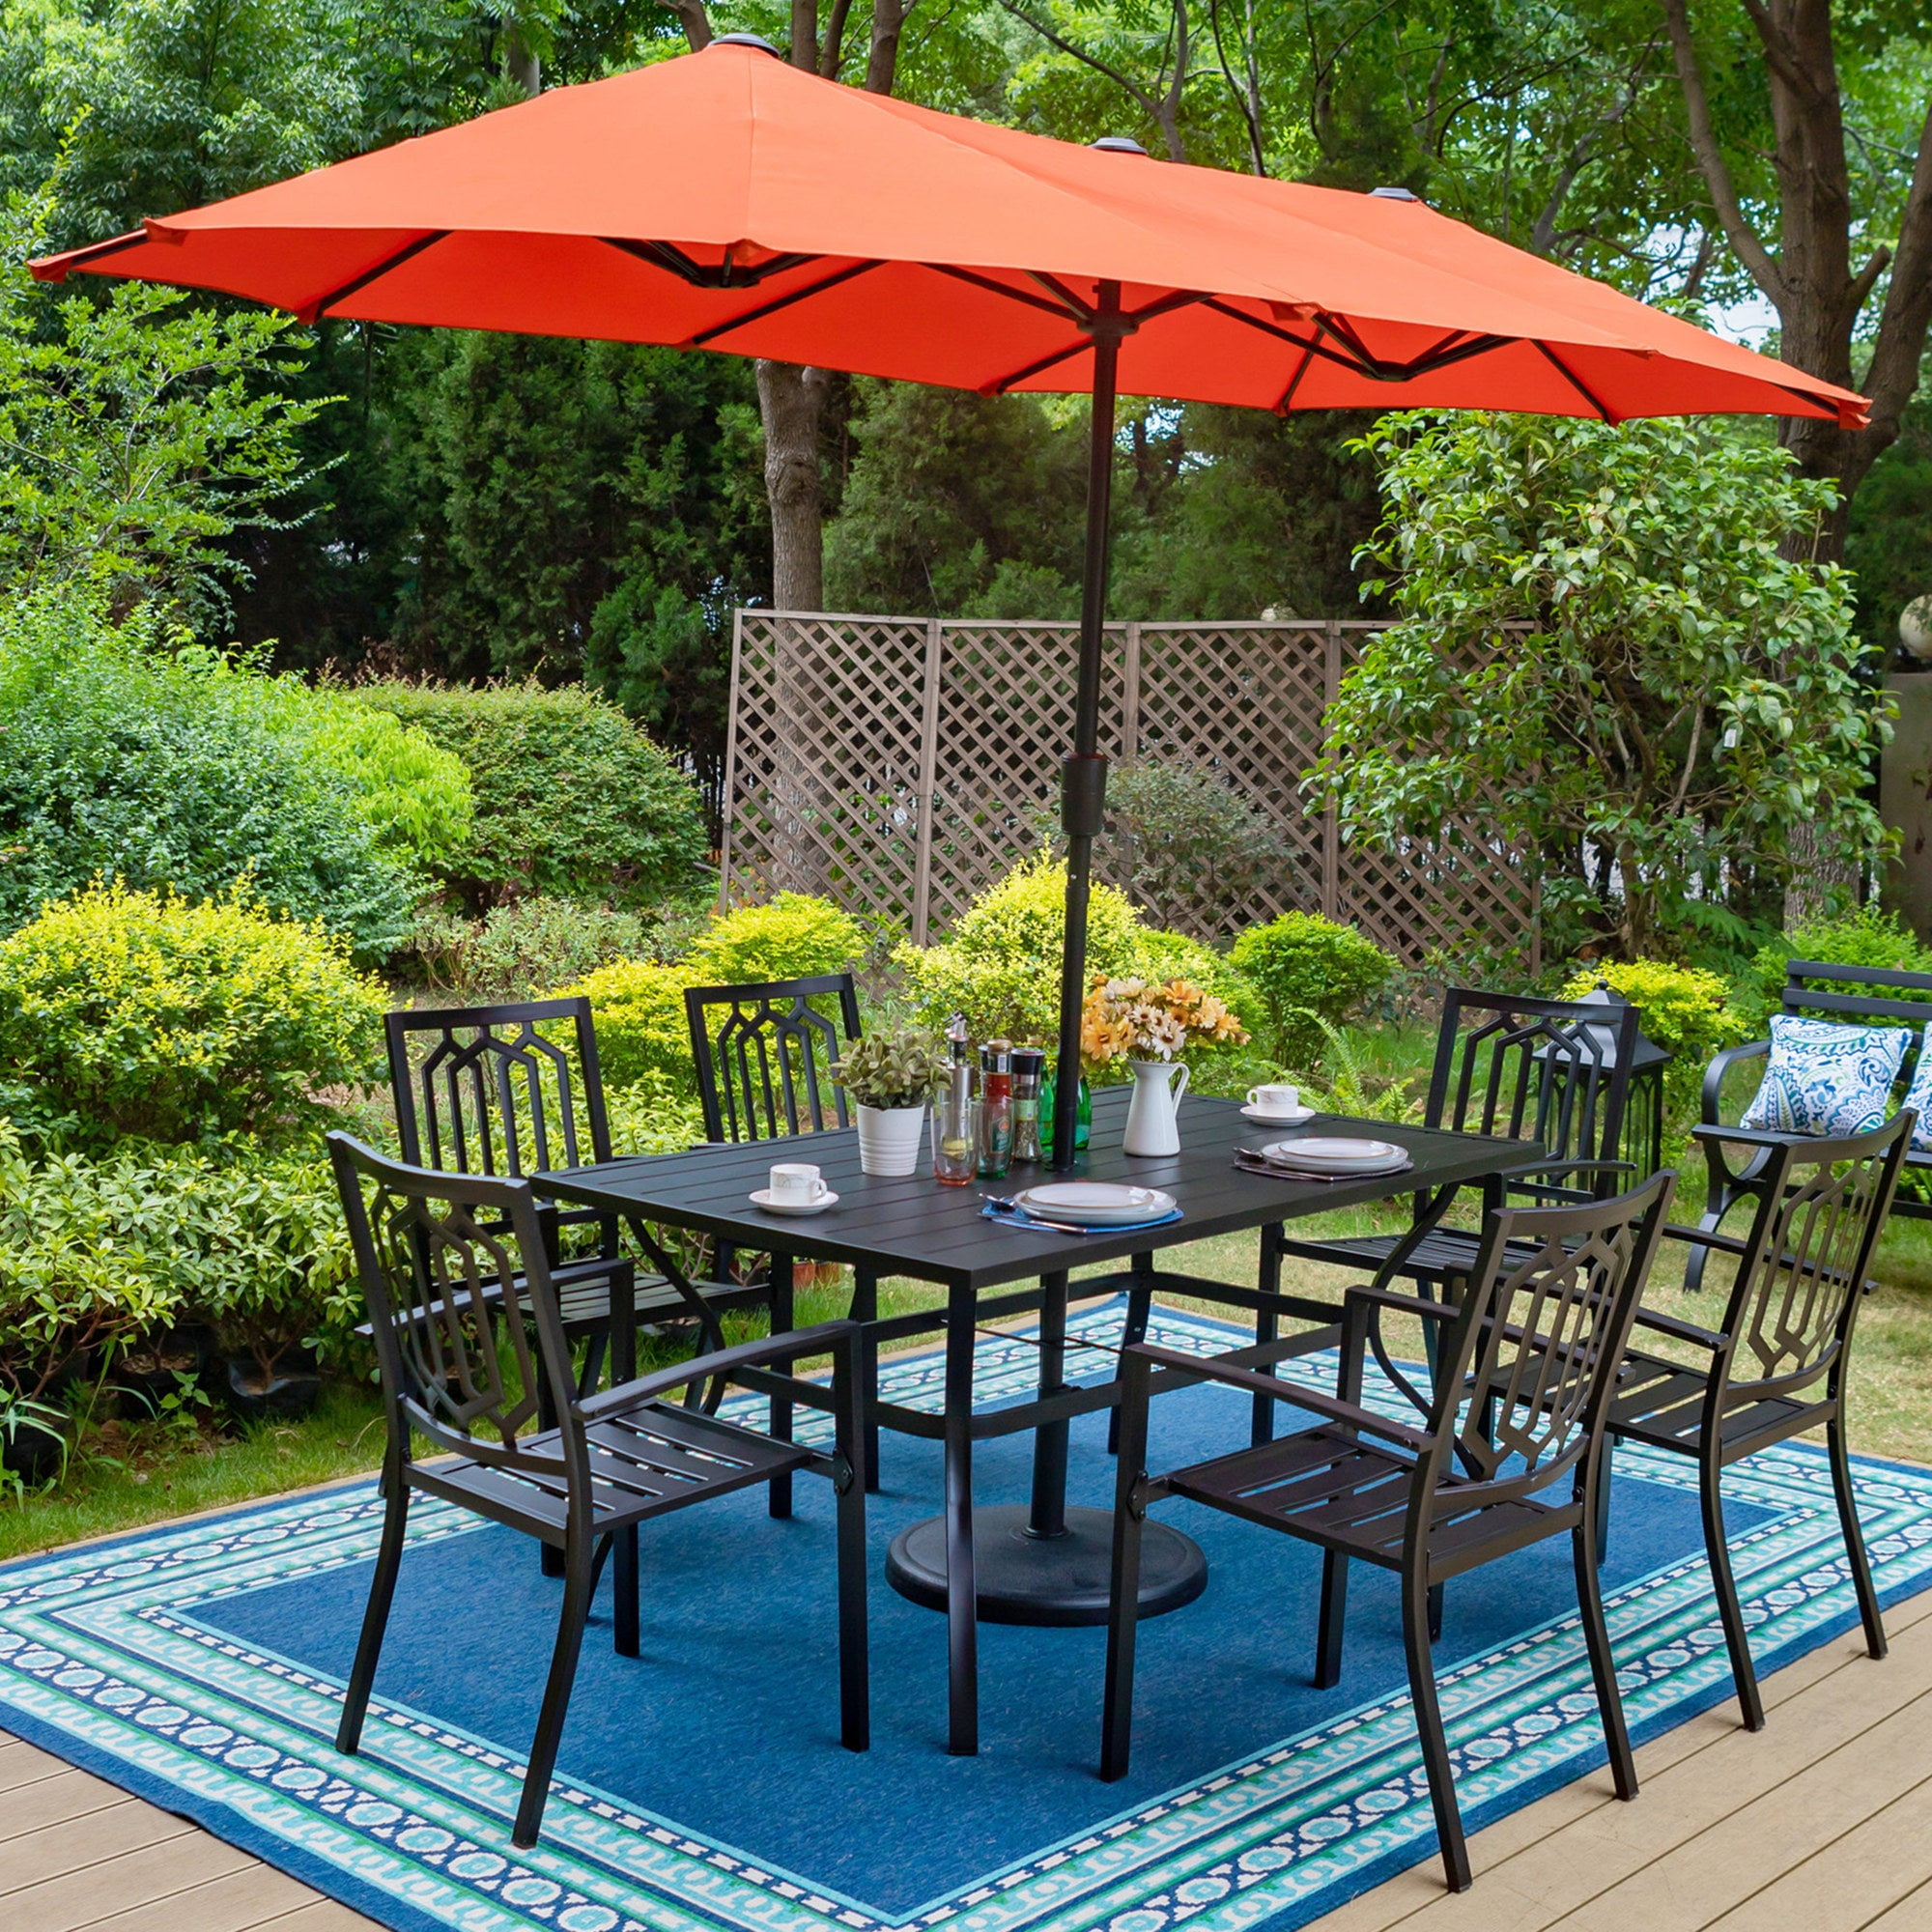 MF Studio 8-Piece Outdoor Dining Set with 13 ft Double-Sided Umbrella,  Rectangle Table&Stack-able Chairs for 6-Person, Black&Orange Red -  Walmart.com